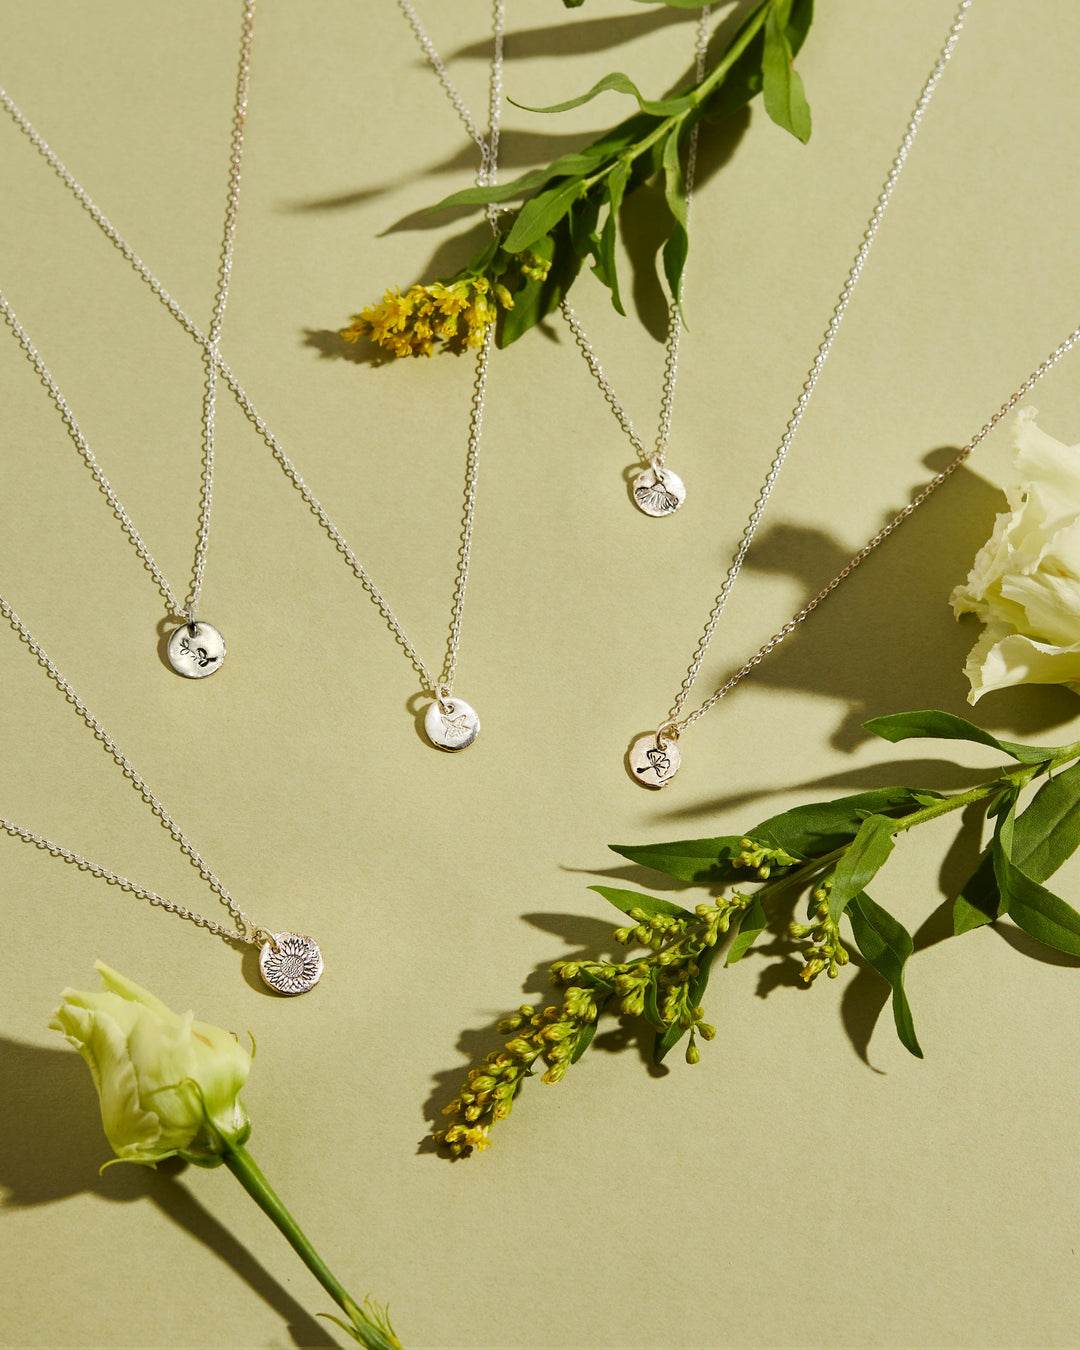 Nature-inspired necklaces